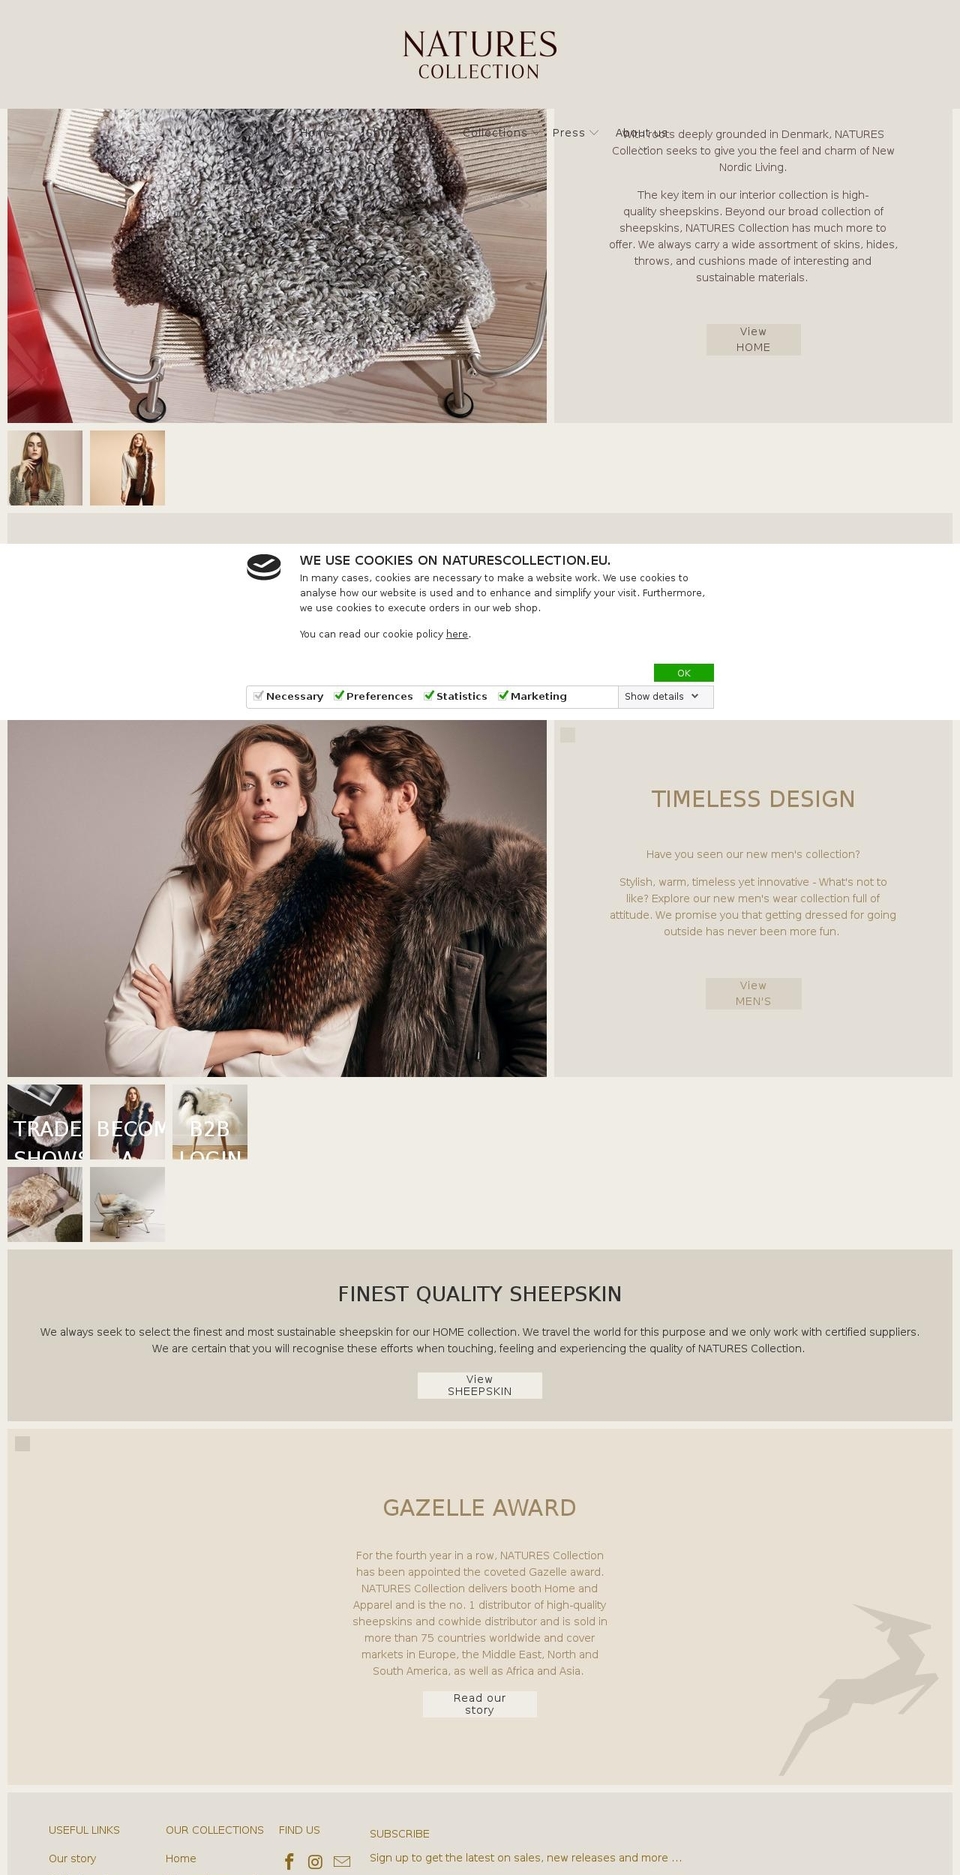 NY Rolf Shopify theme site example naturescollection.eu